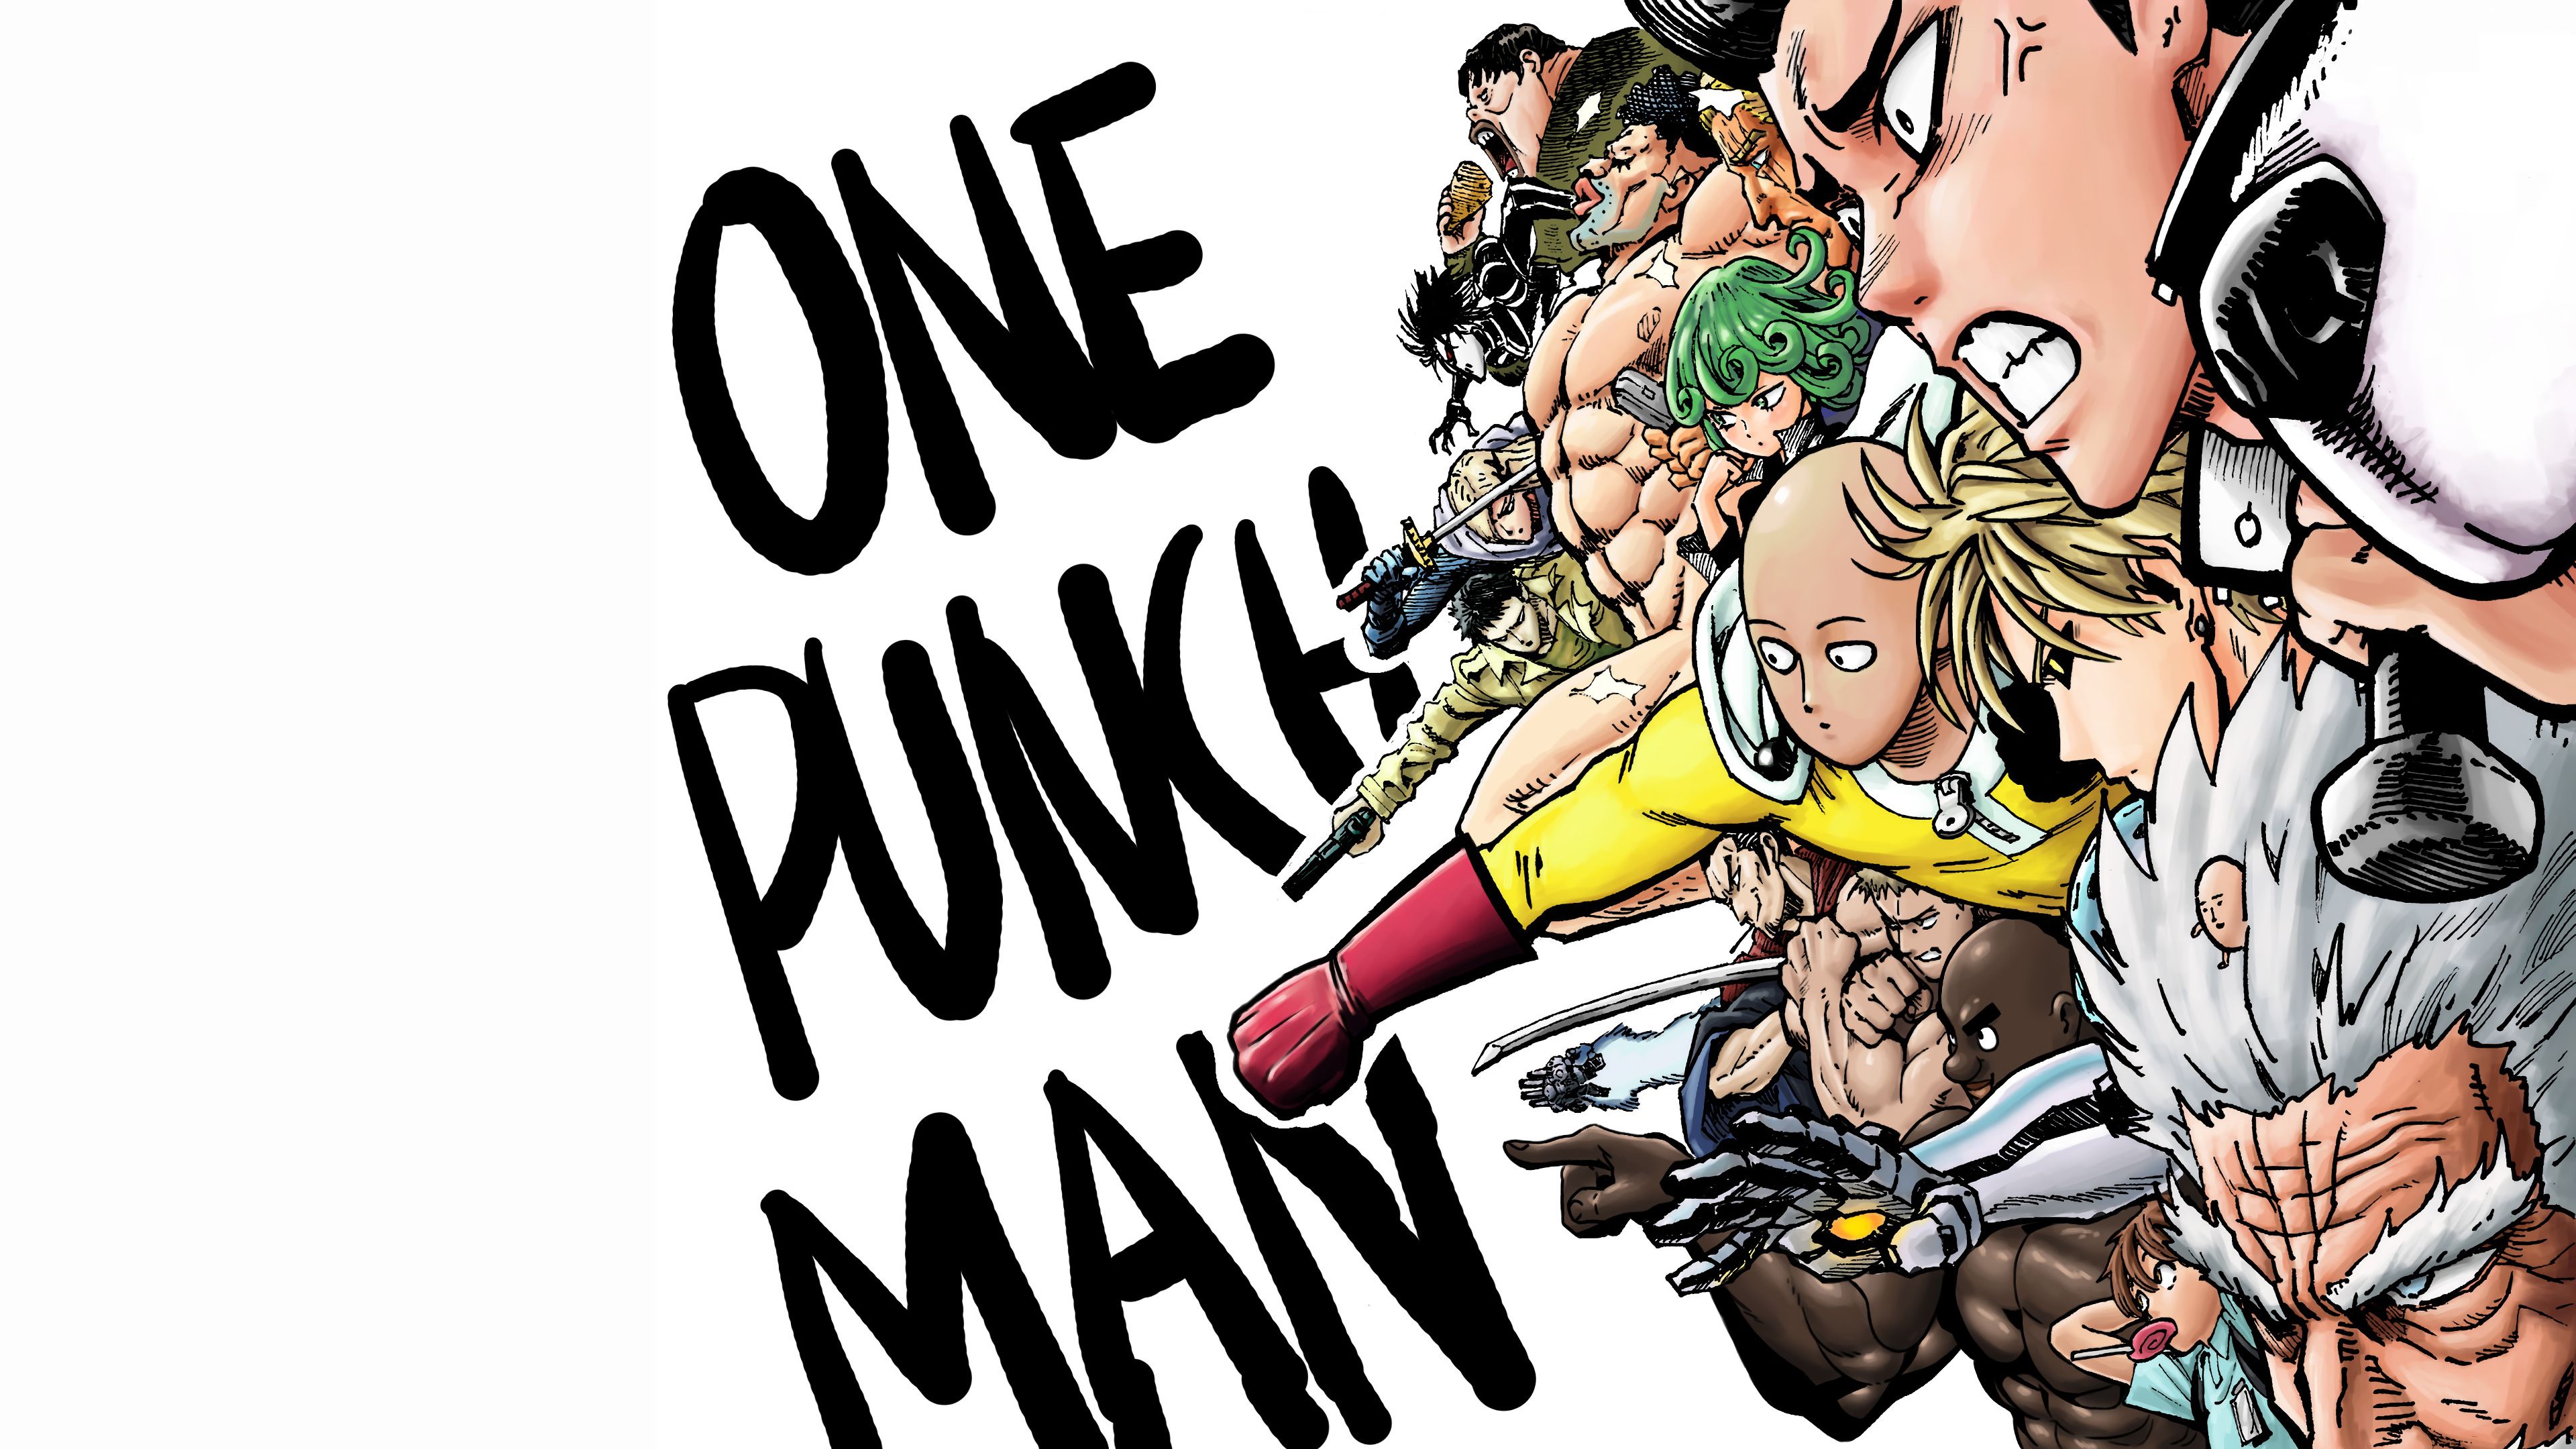 1920x1080 Saitama One Punch Man 4k Laptop Full HD 1080P ,HD 4k Wallpapers ,Images,Backgrounds,Photos and Pictures